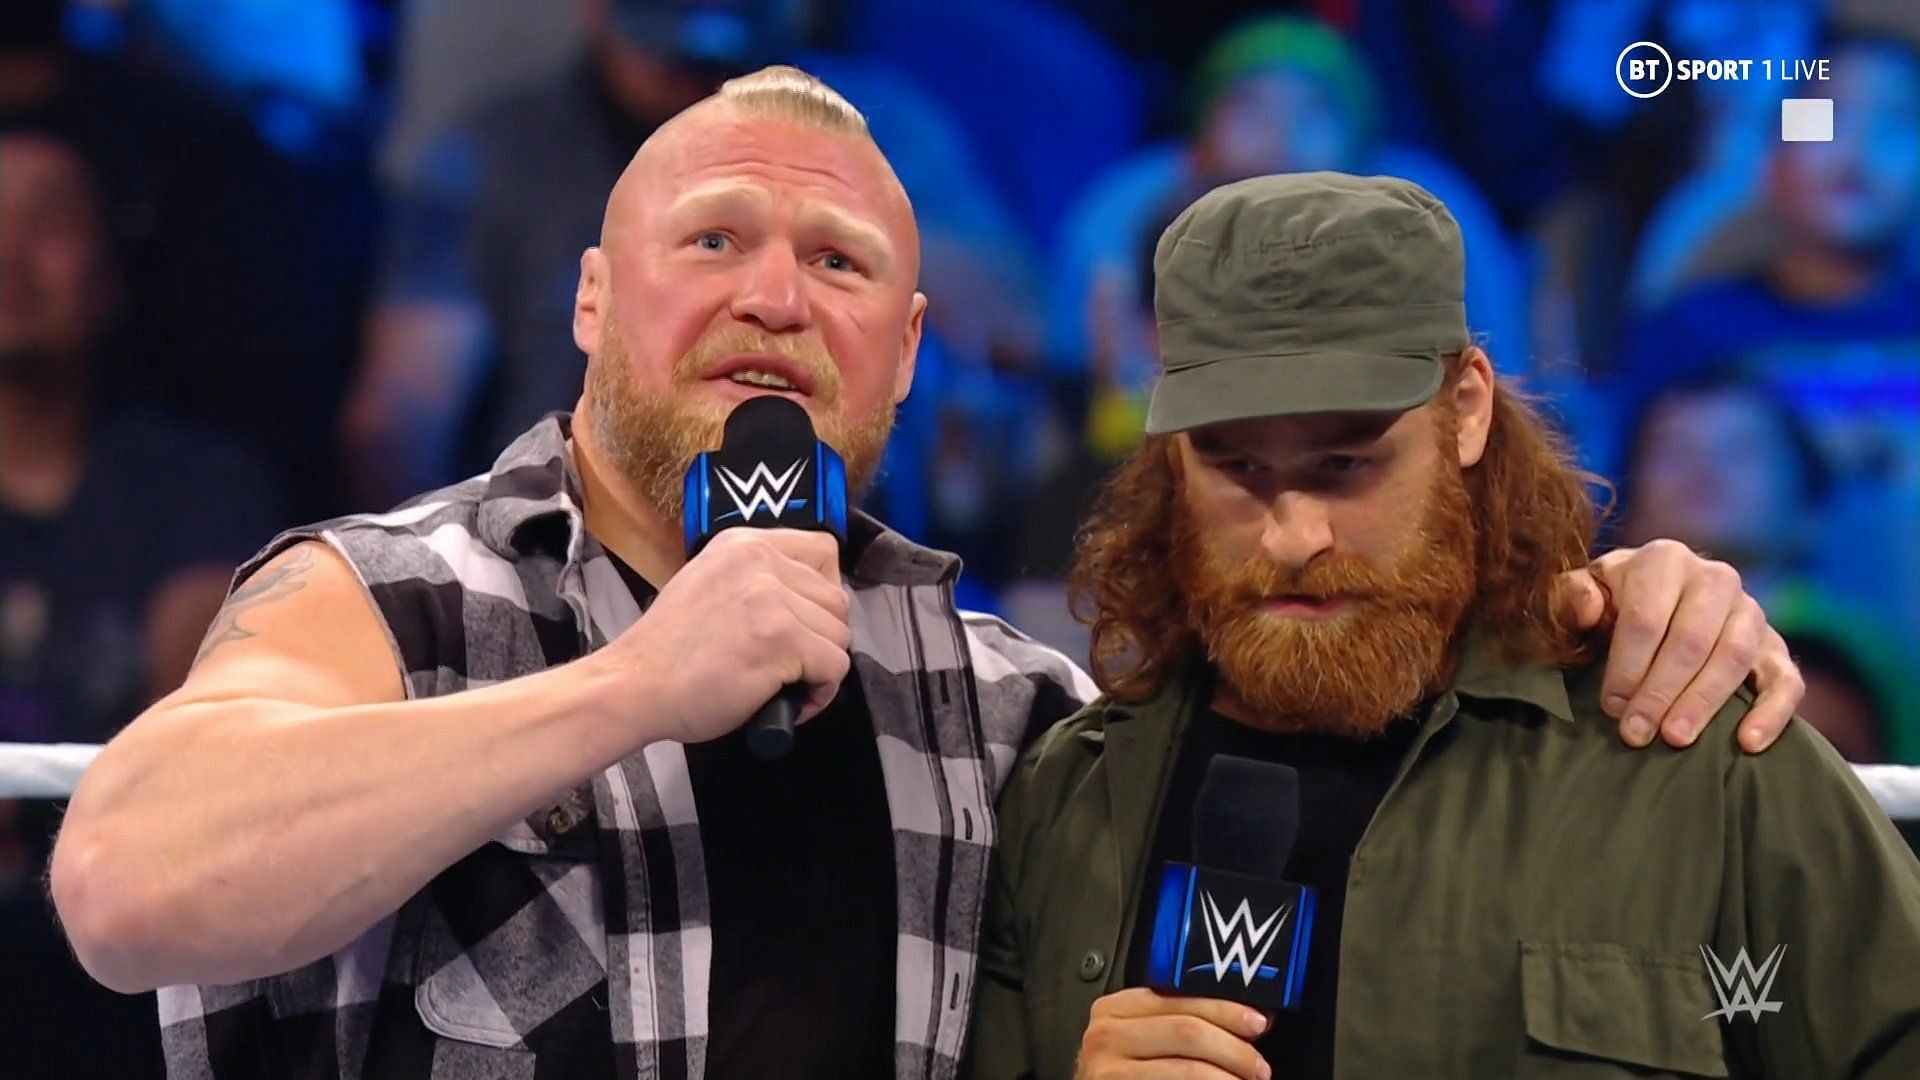 Brock Lesnar convinced Sami Zayn to take on Roman Reigns for the Universal Title